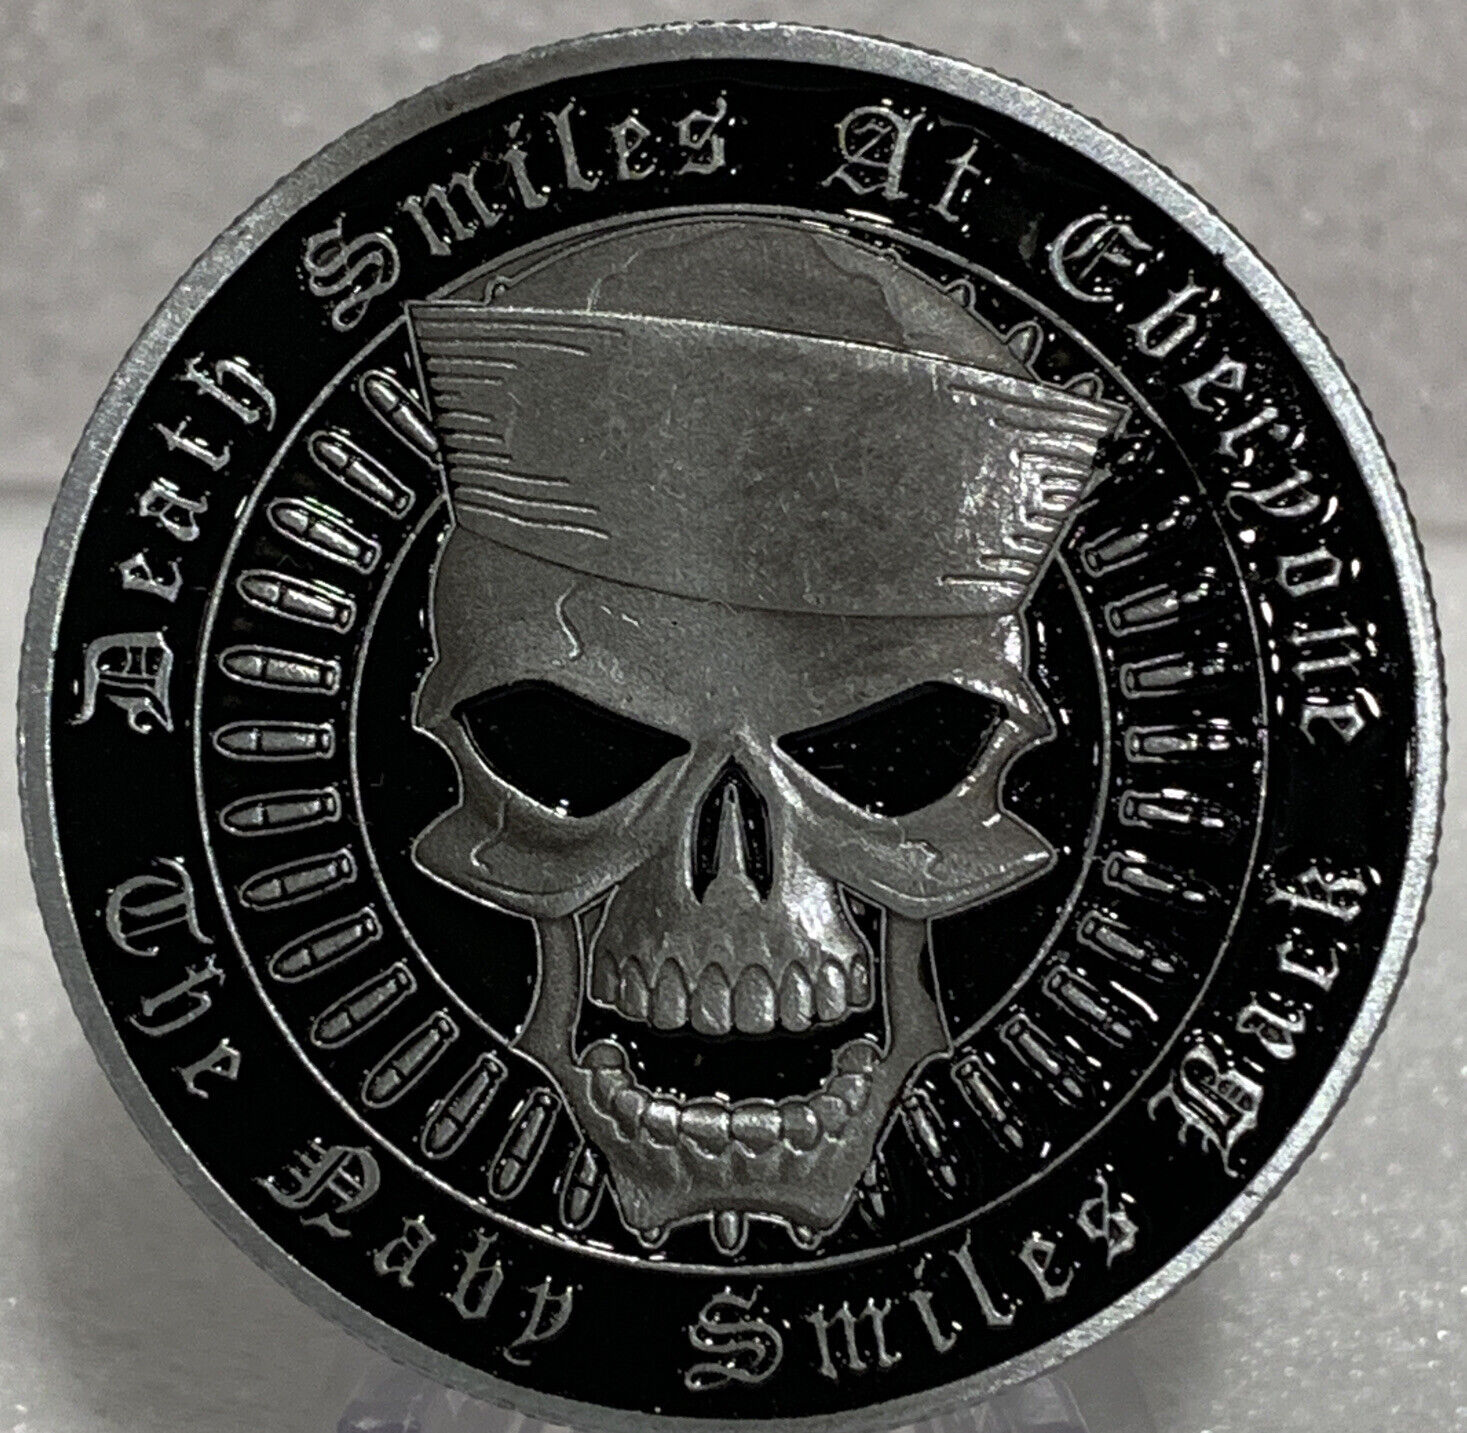 * US Navy Challenge Coin Death Smiles at Eberyone / The Navy Smiles Back Coin